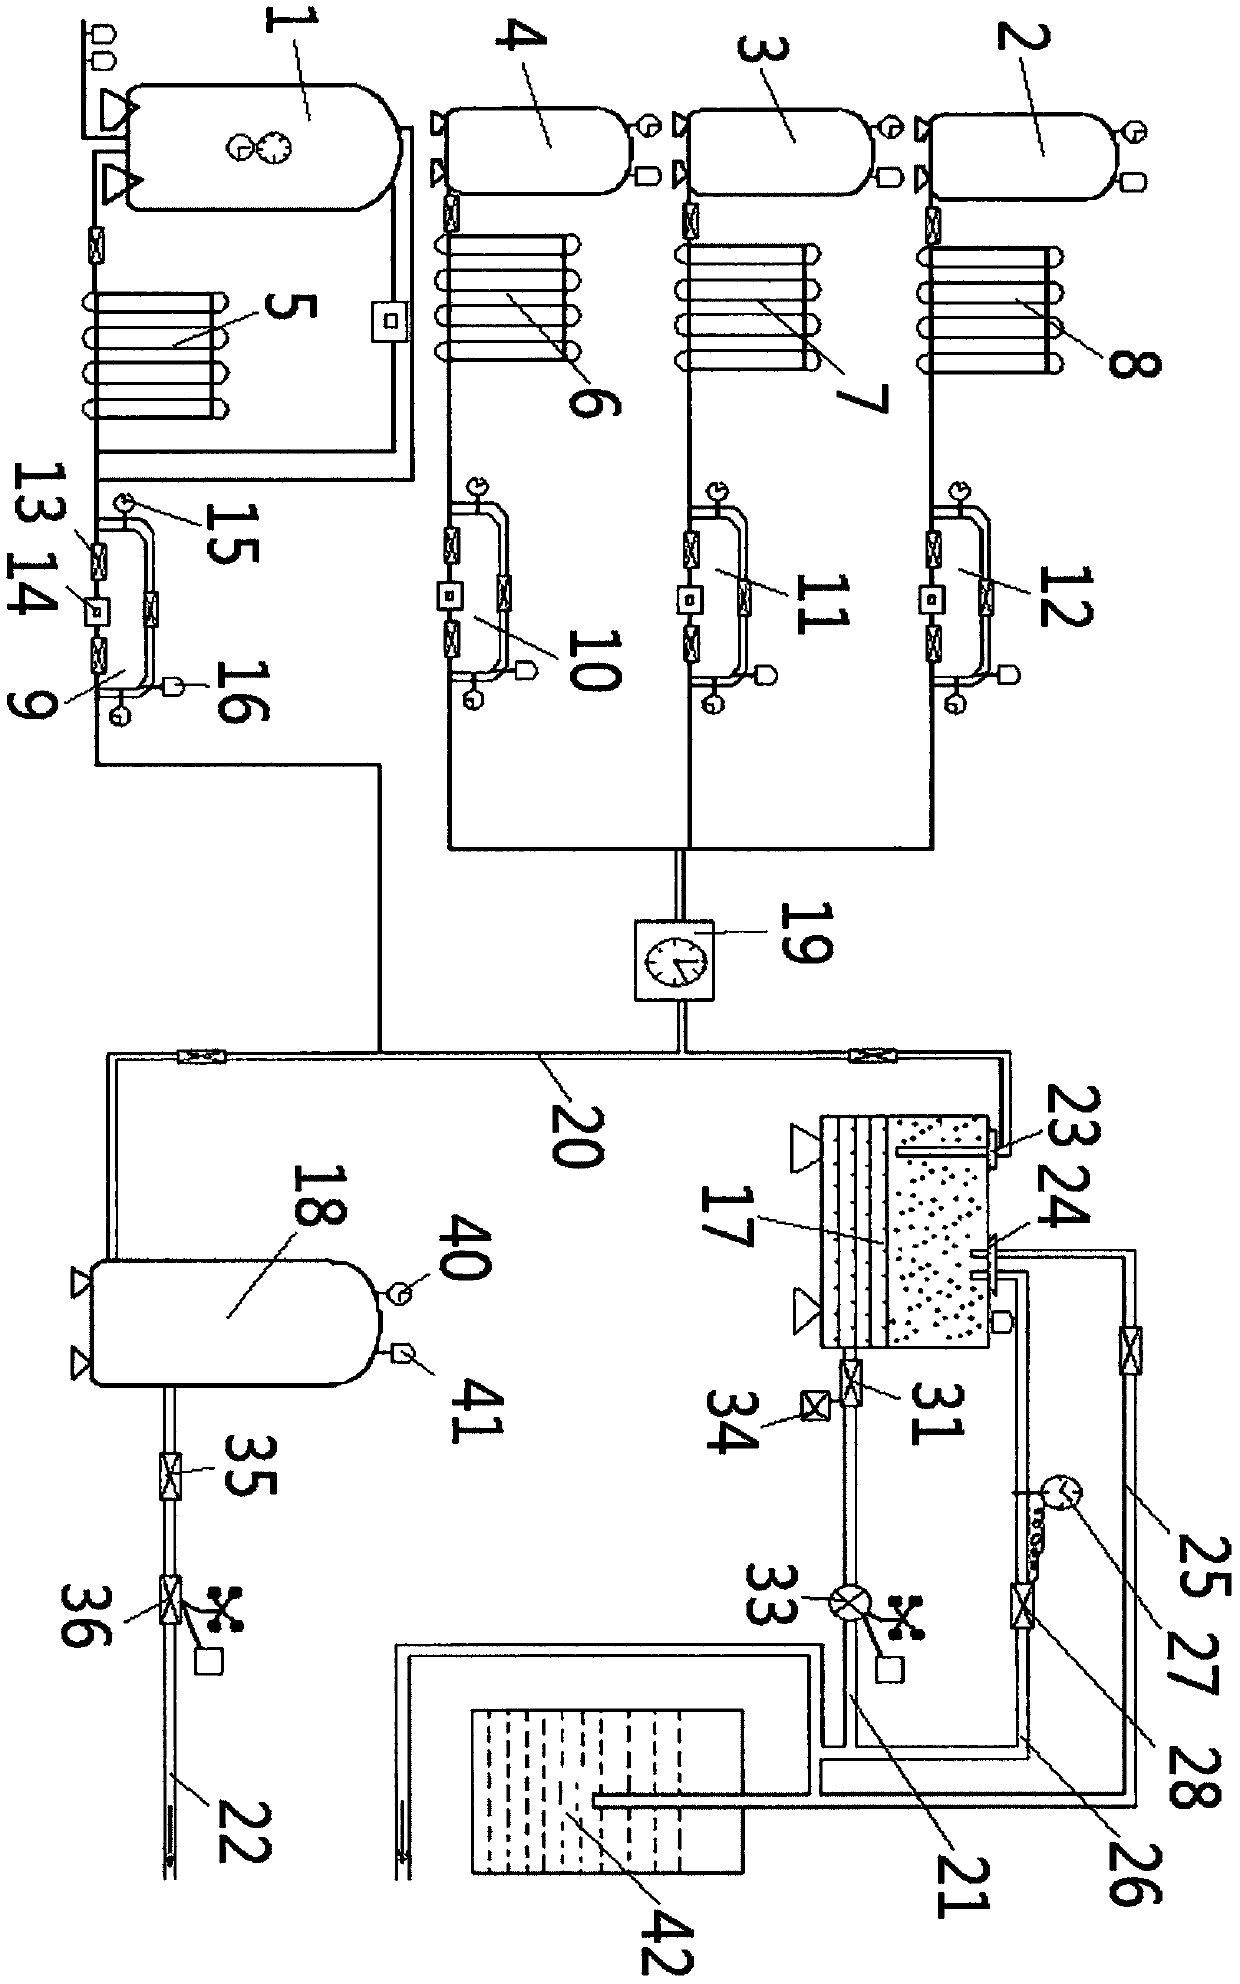 Production increasing device and system by applying and adjusting carbon dioxide concentration